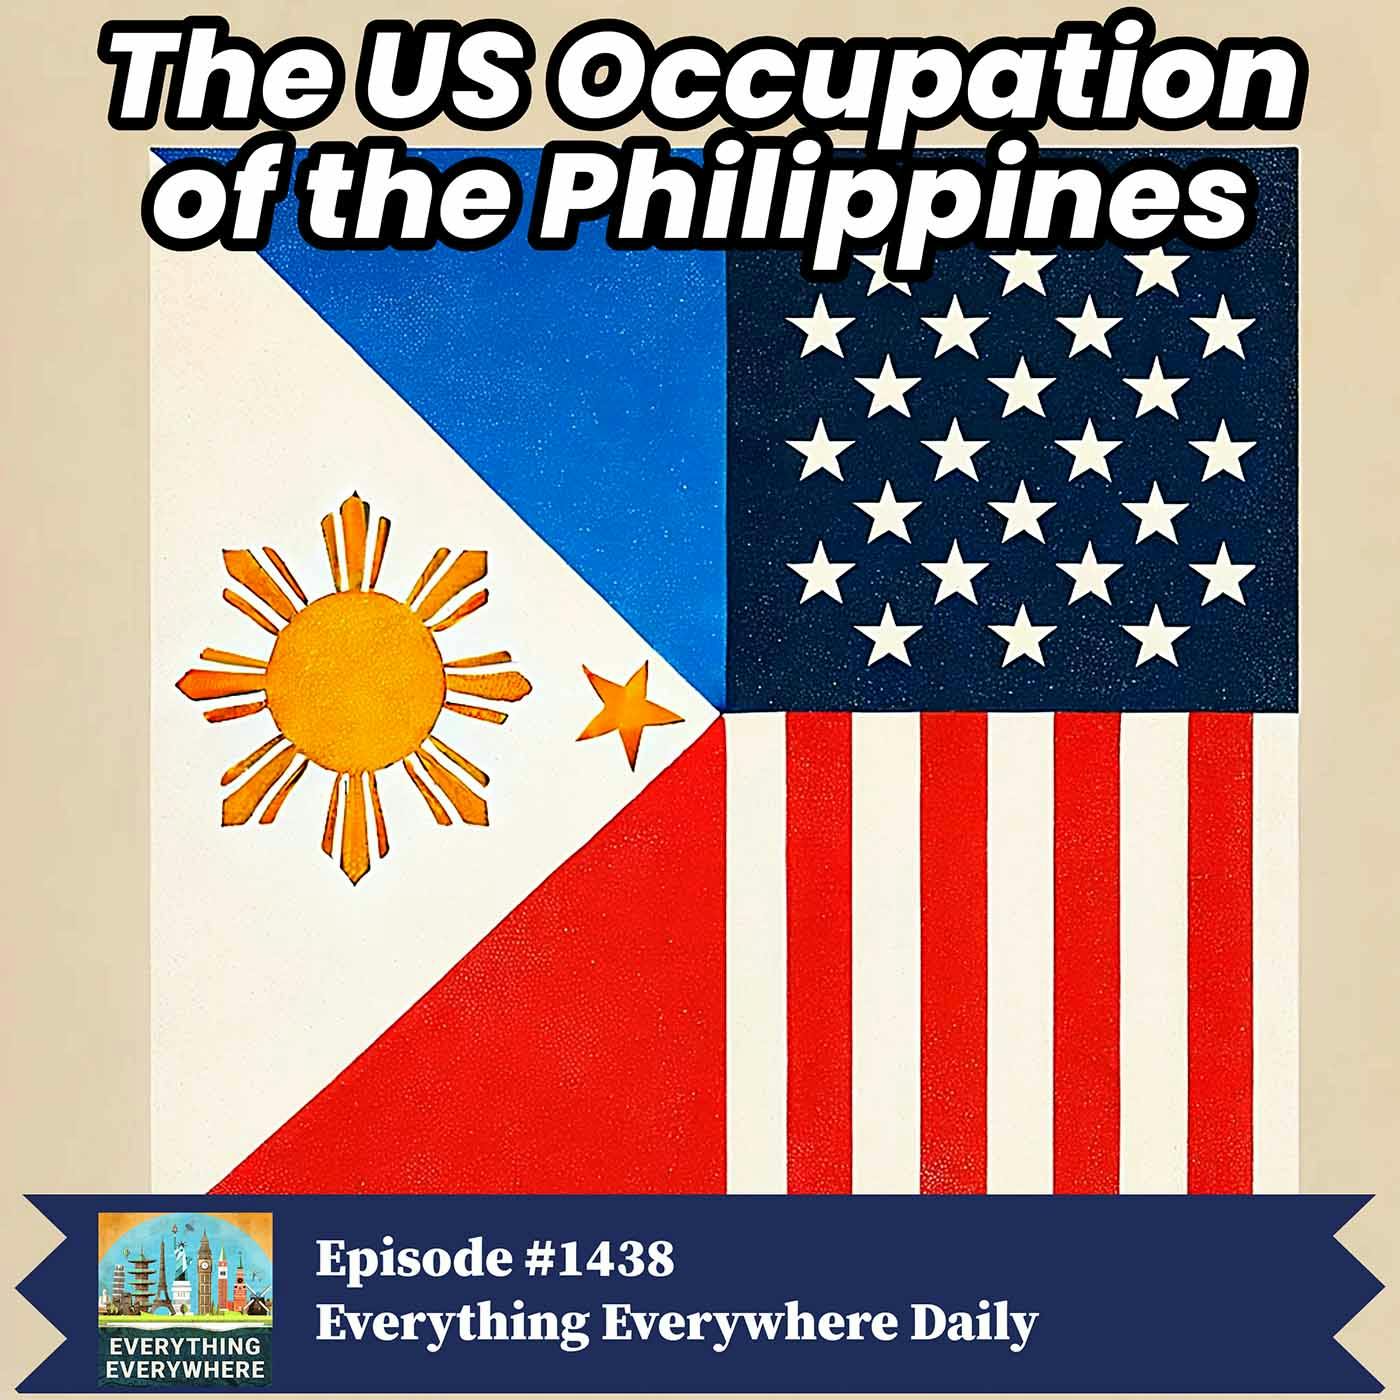 The US Occupation of the Philippines